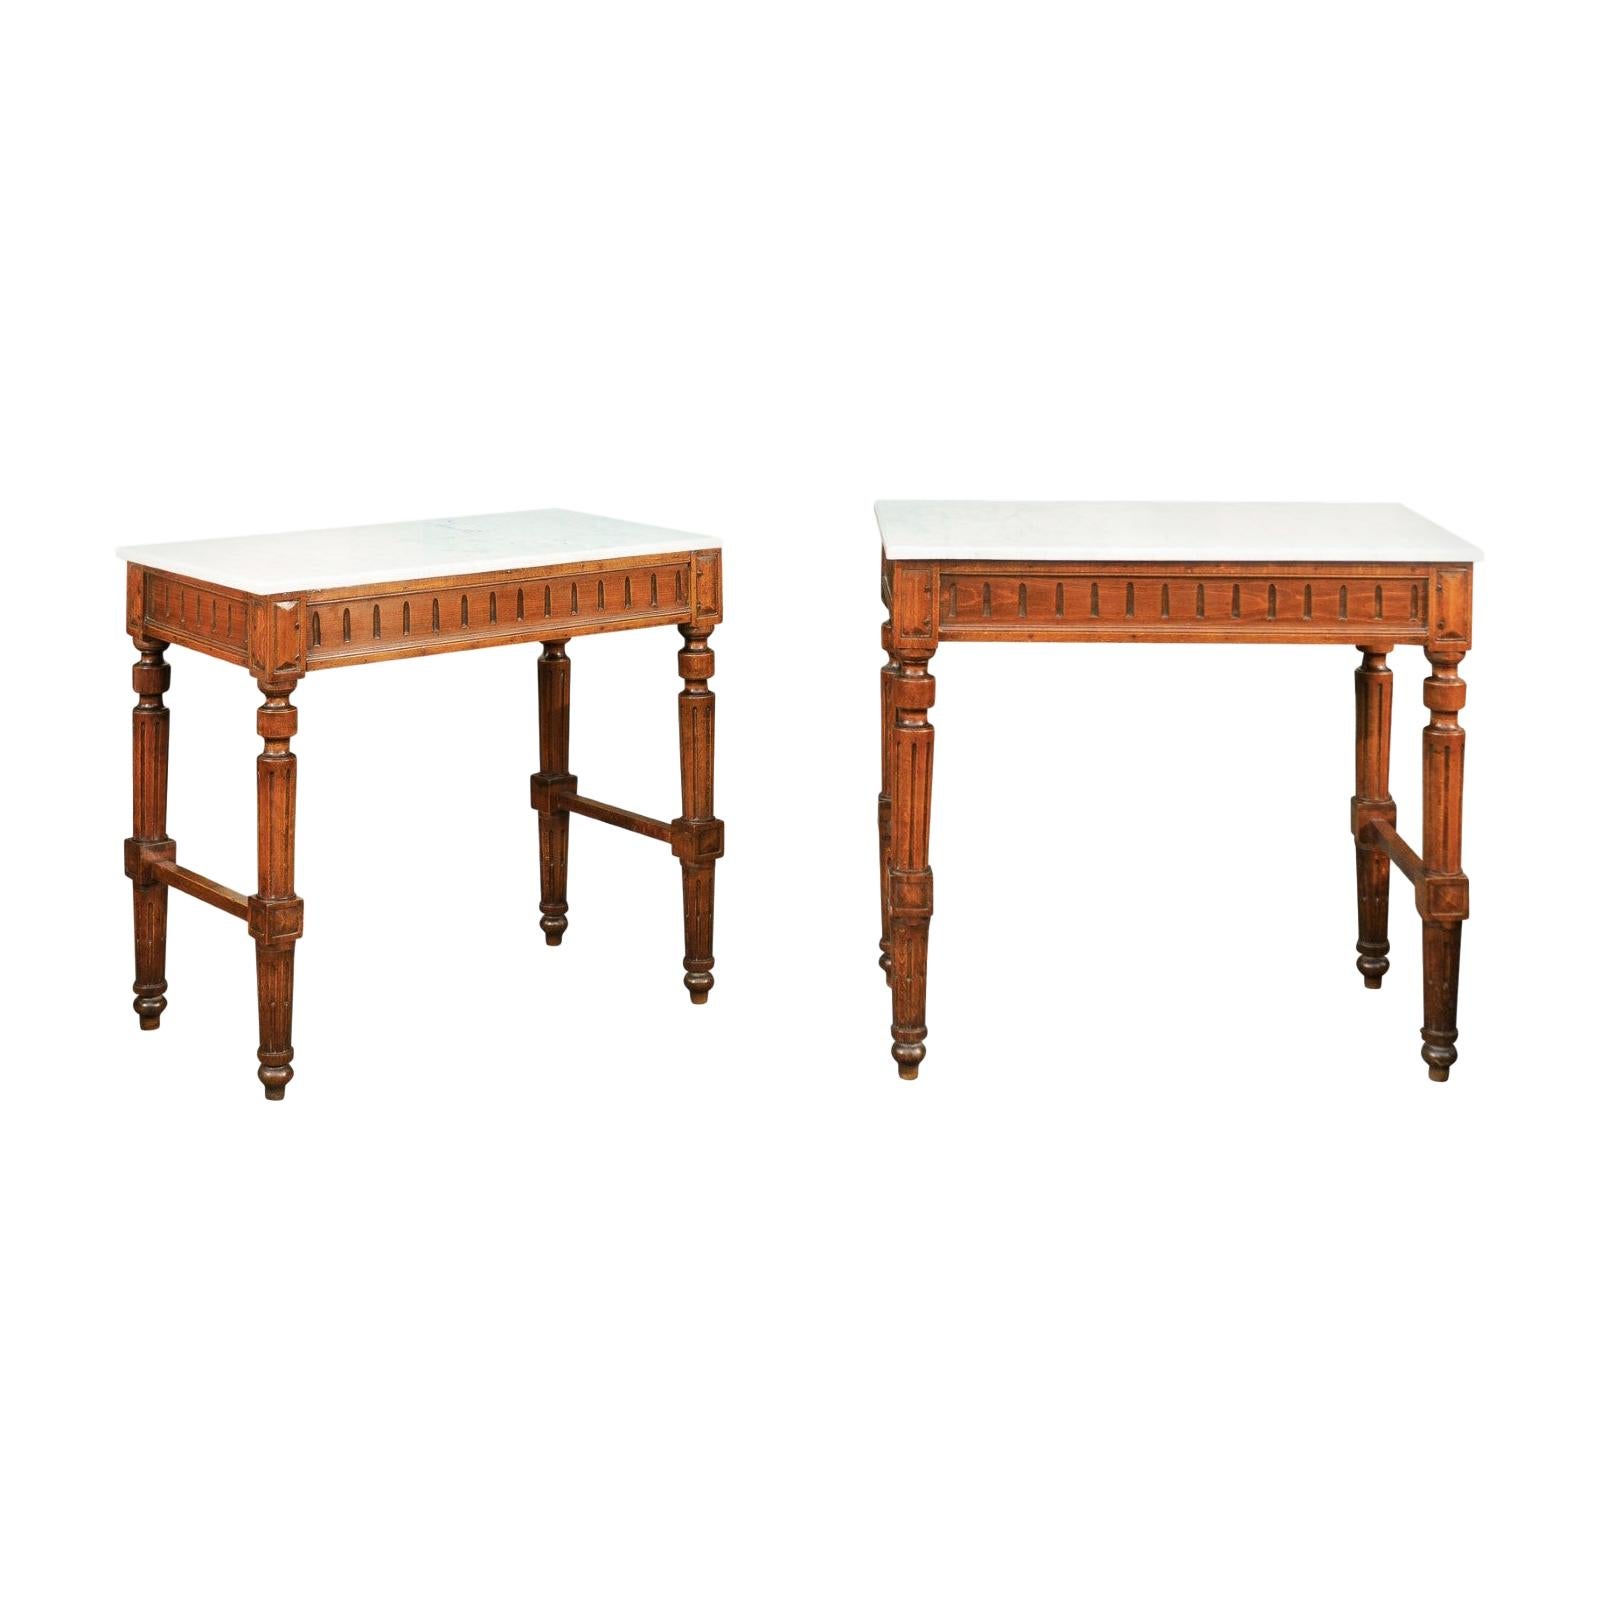 Pair of French 1870s Neoclassical Style Wooden Console Tables with Marble Tops For Sale